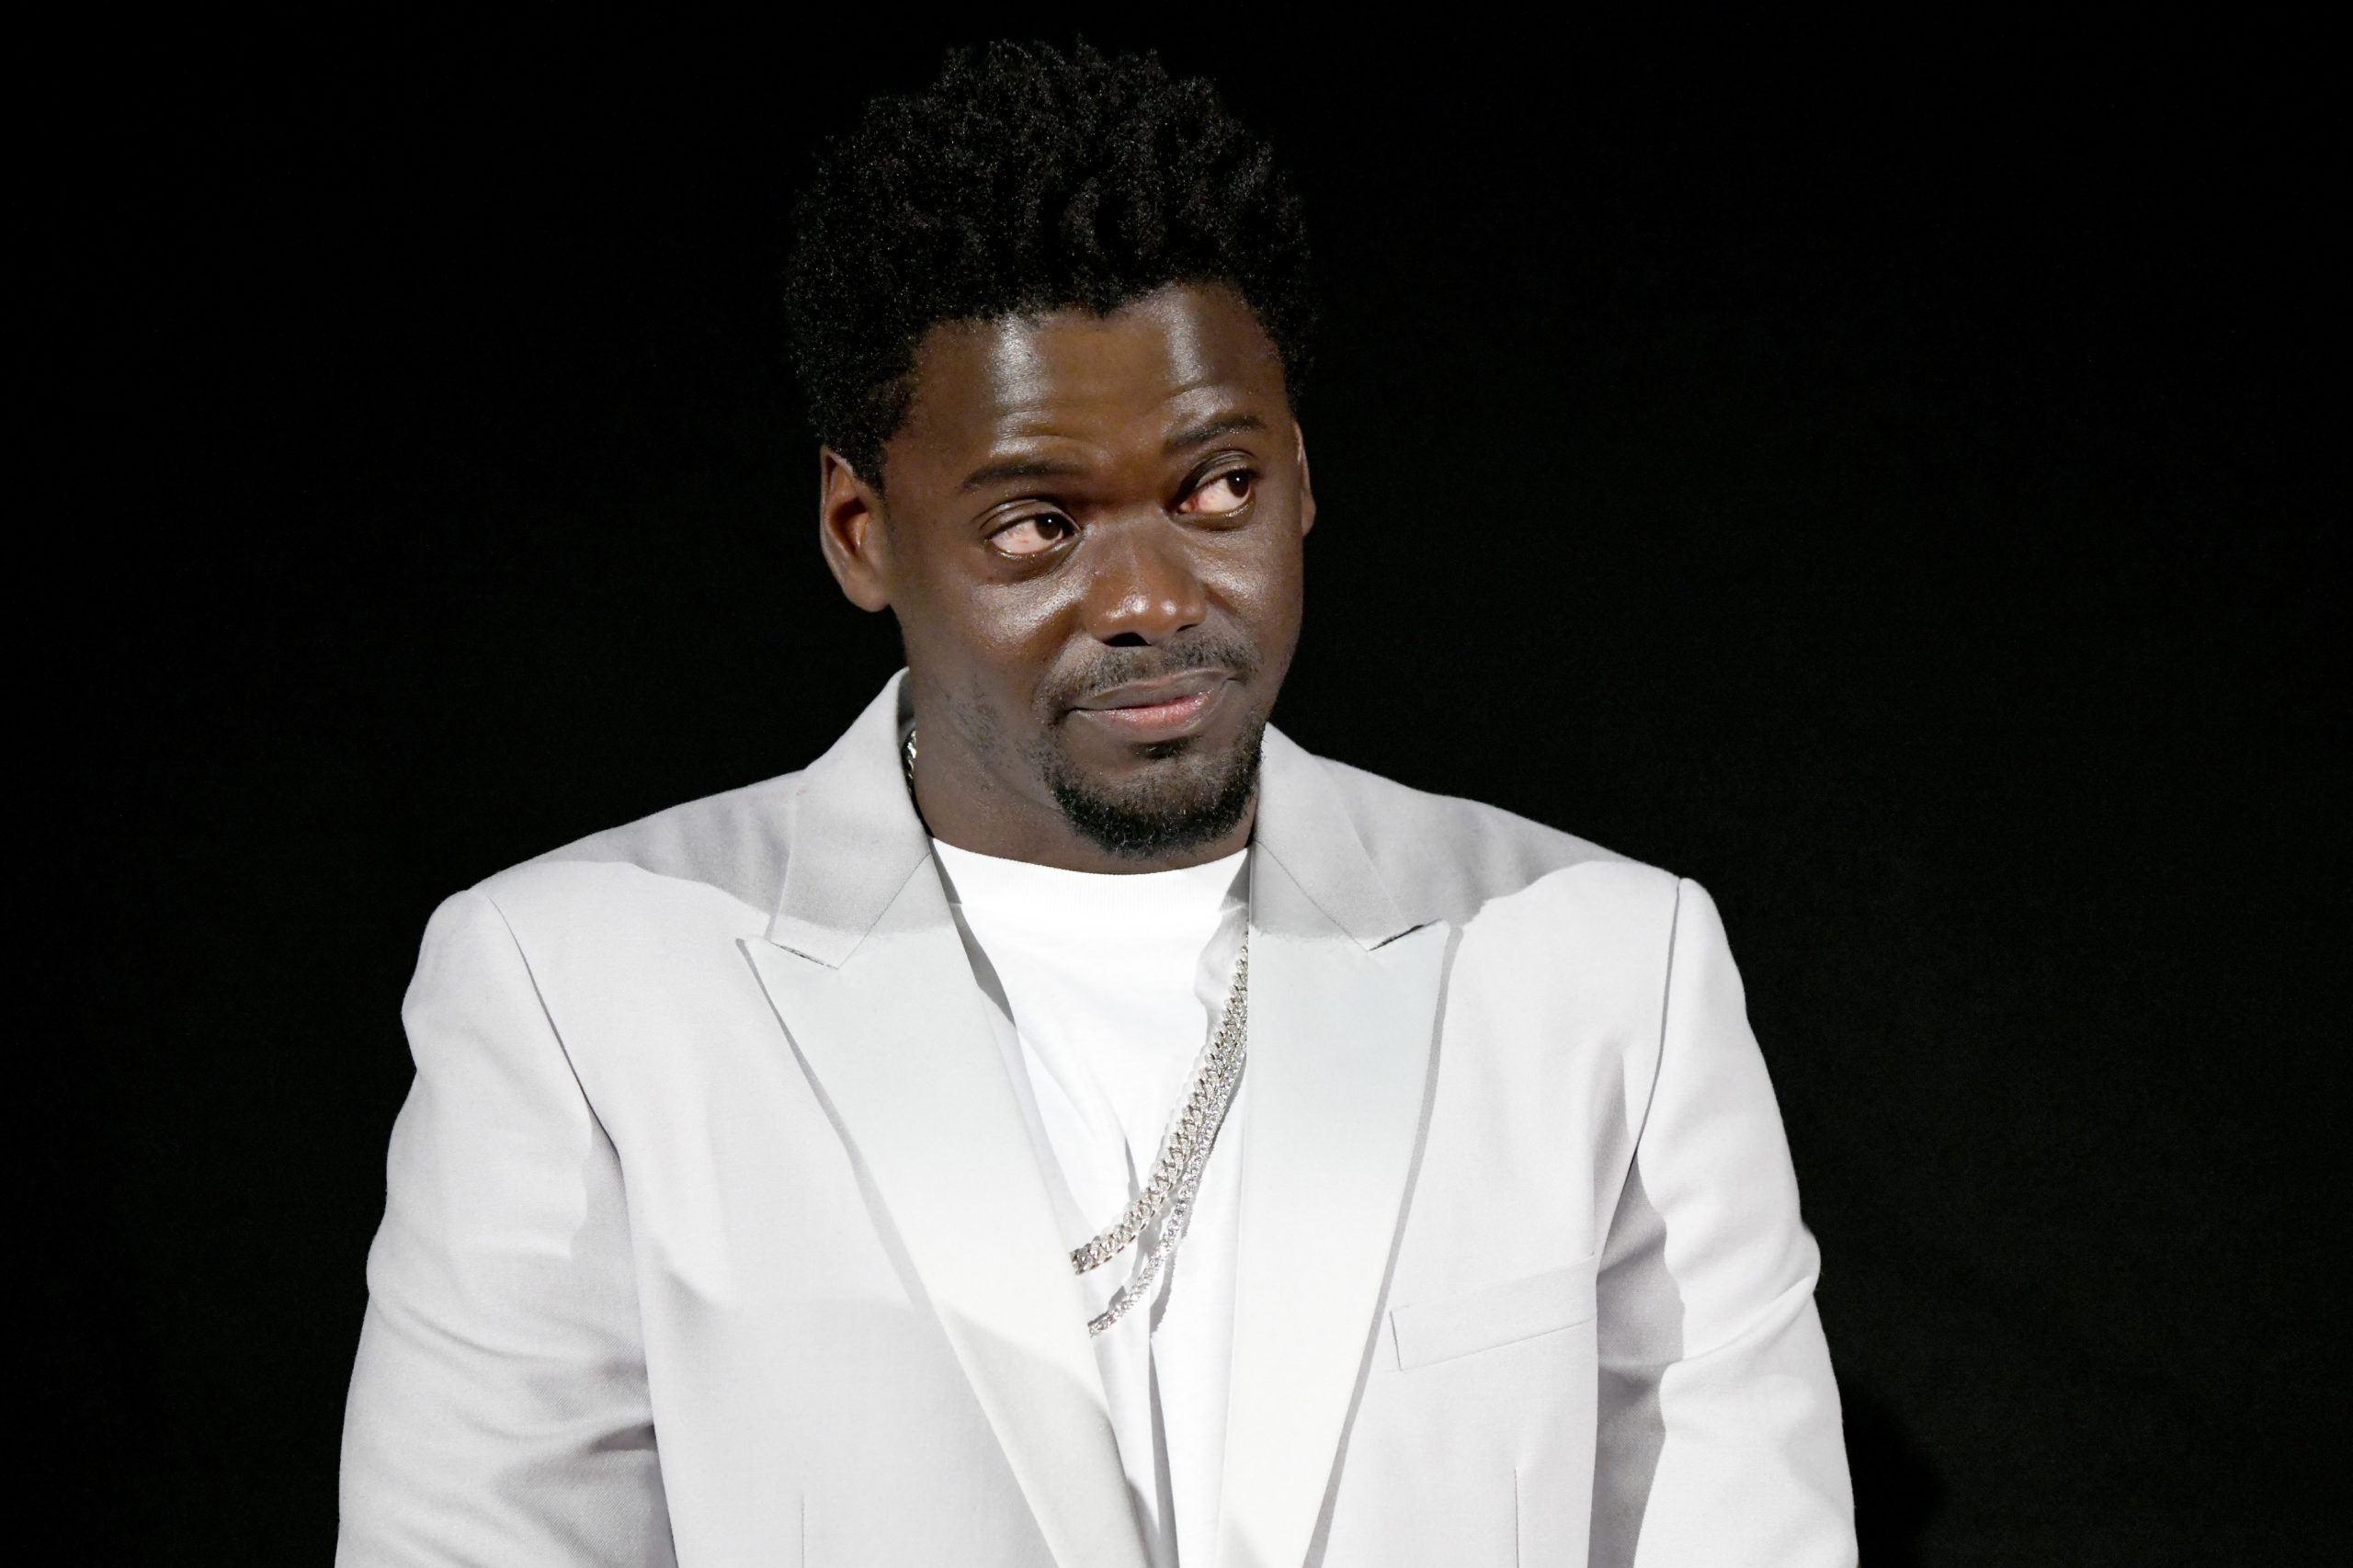 Why British Actor Daniel Kaluuya Will Not Appear In ‘Black Panther’ Sequel